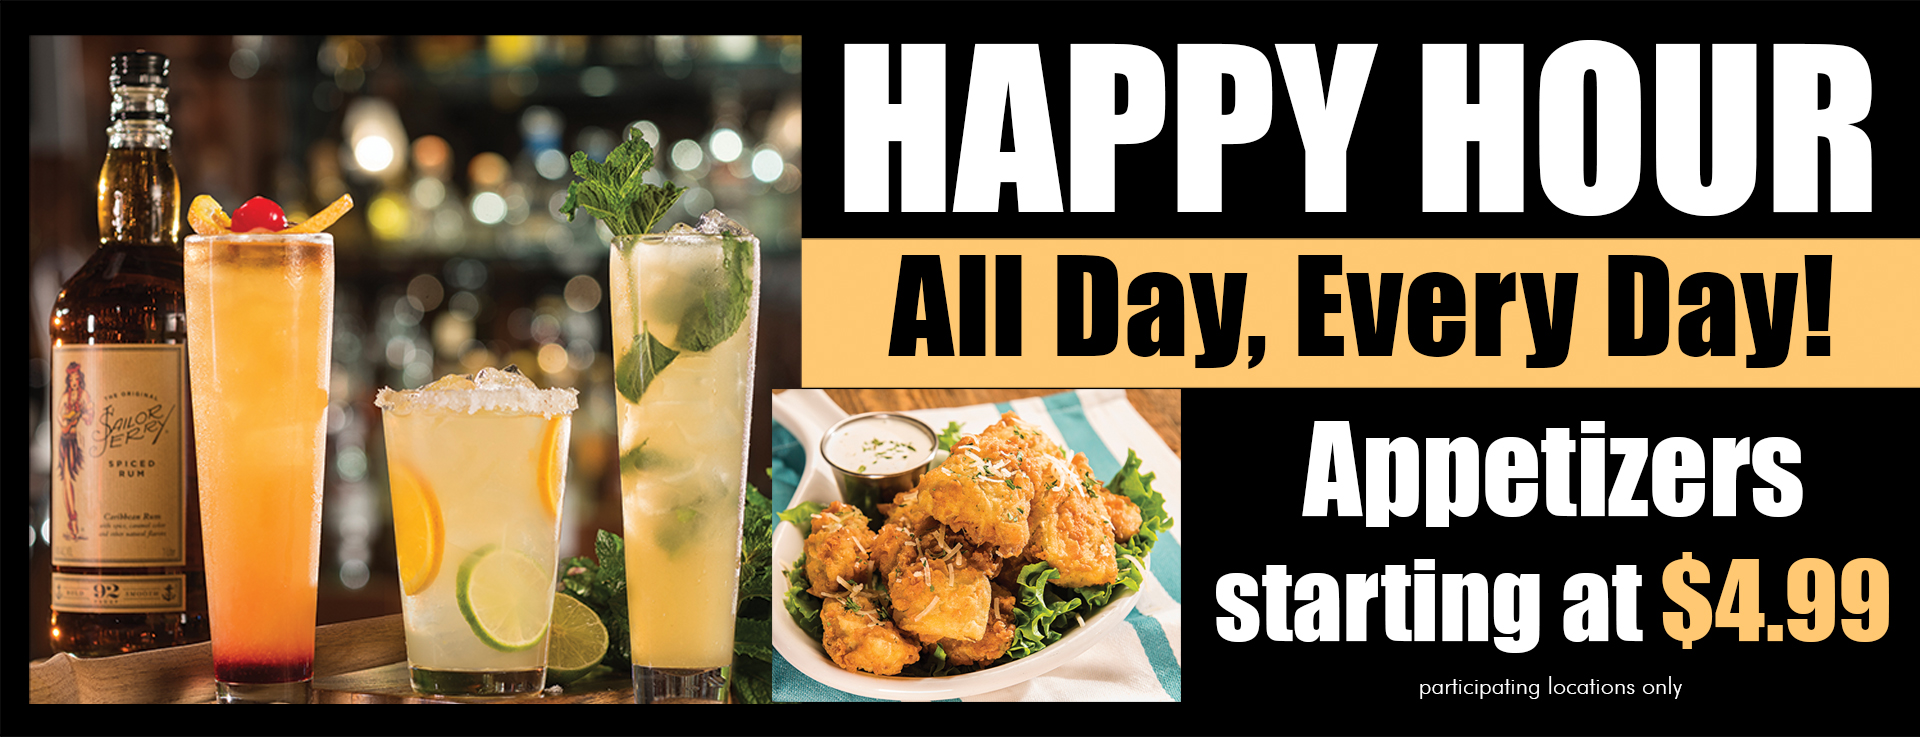 Happy hour all day, every day